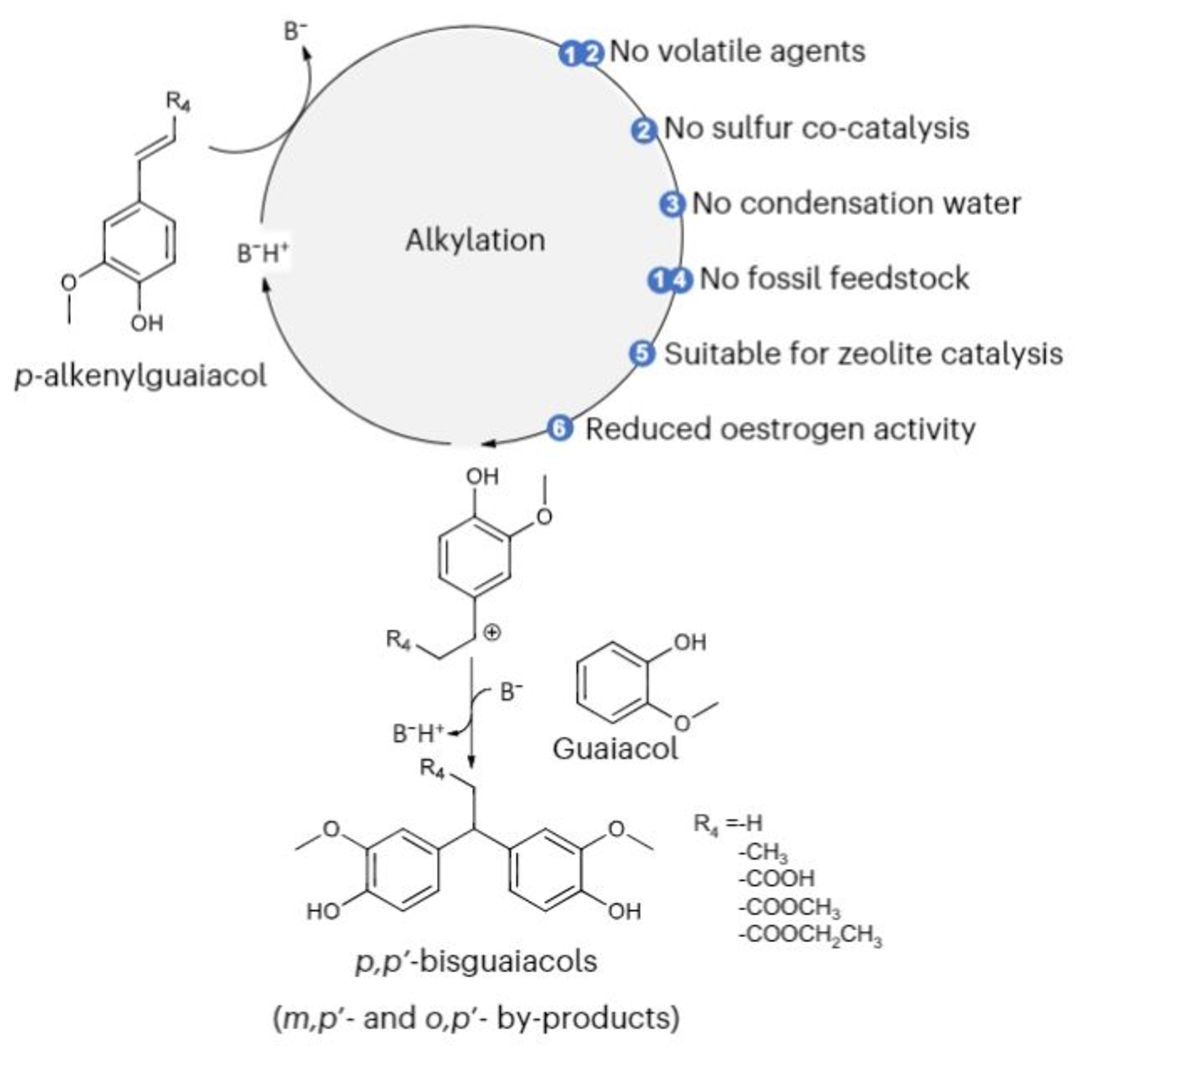 [77] Renewable and safer bisphenol A substitutes enabled by selective zeolite alkylation